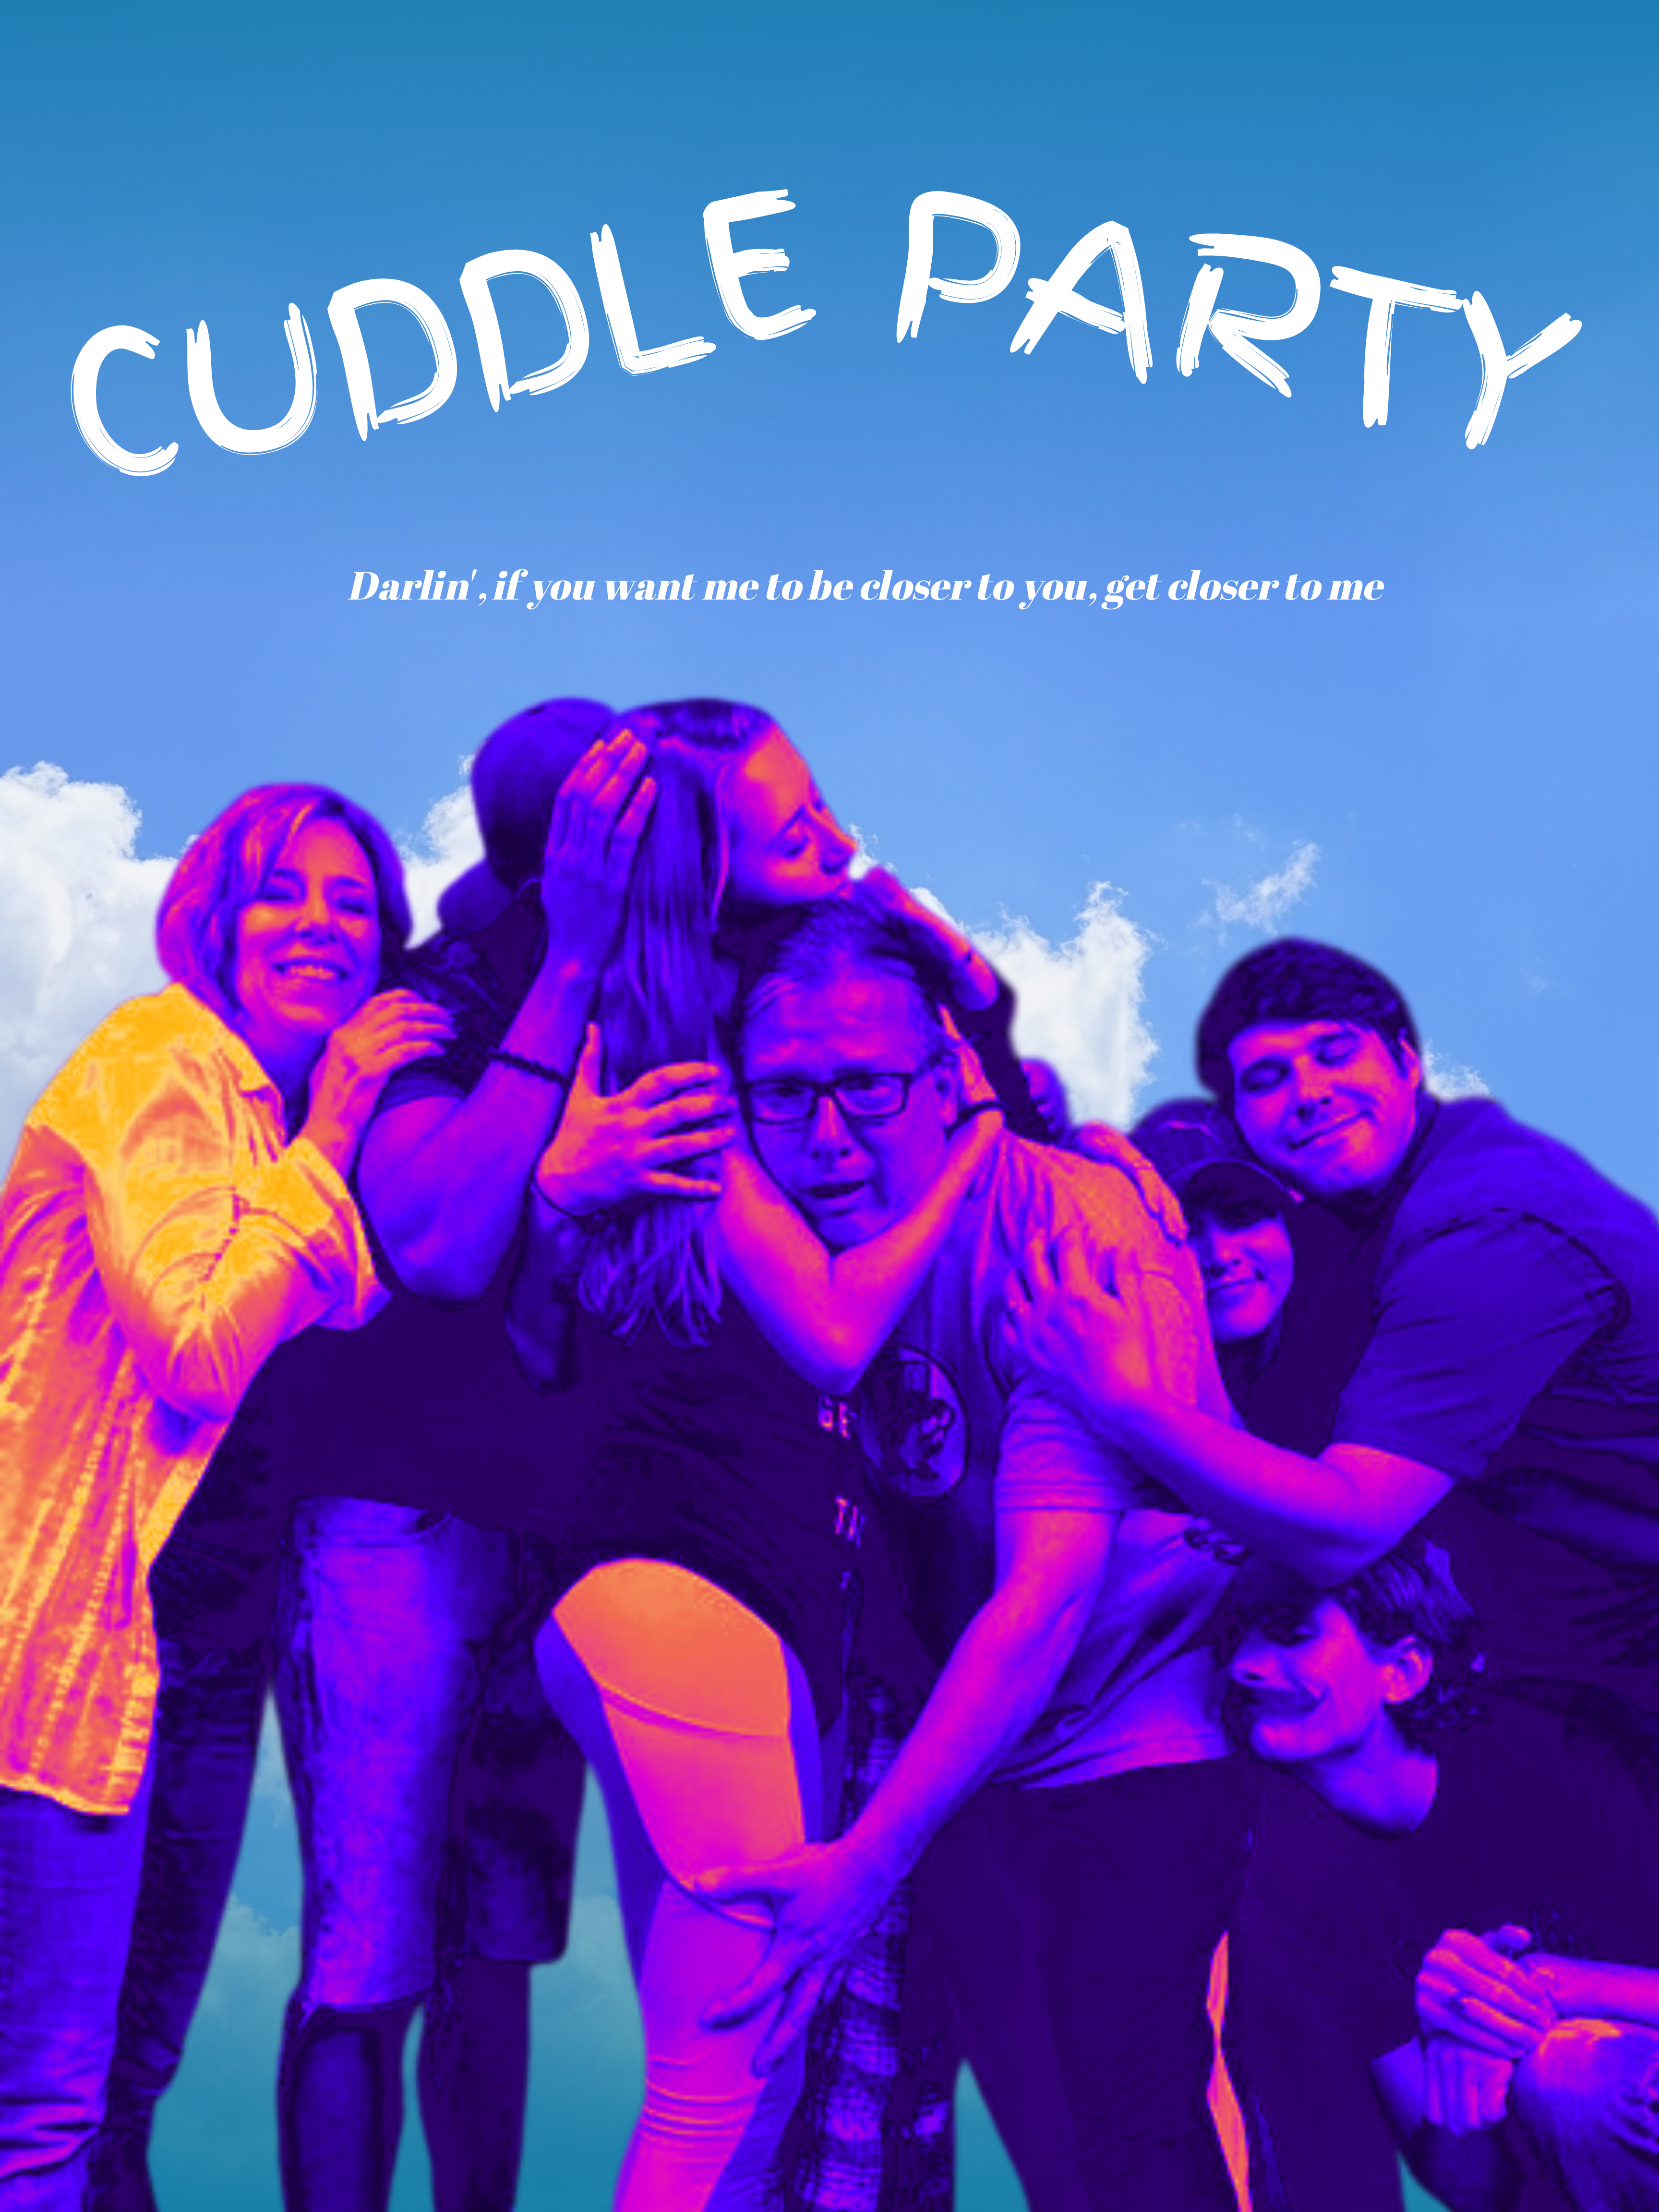 THE CUDDLE PARTY